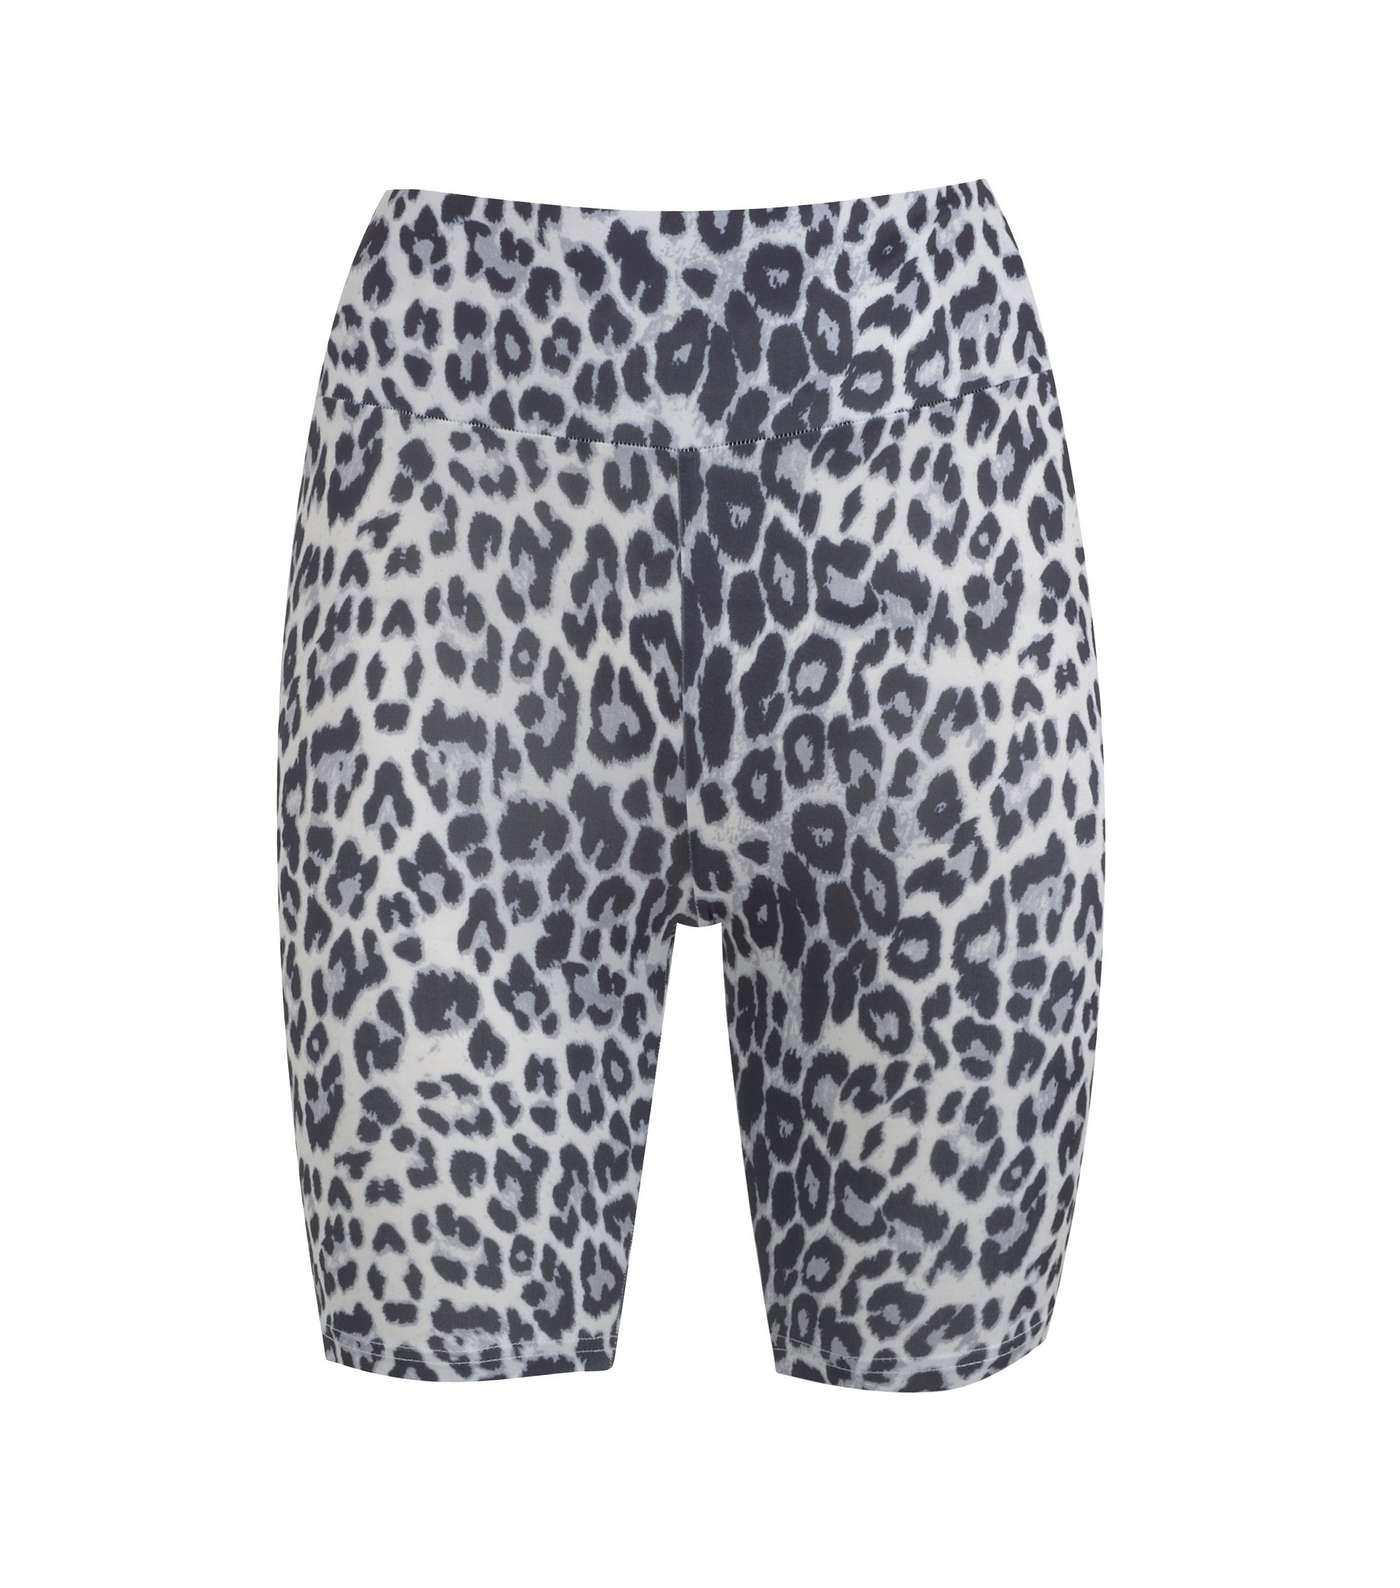 White Leopard Print Cycling Shorts  Image 5